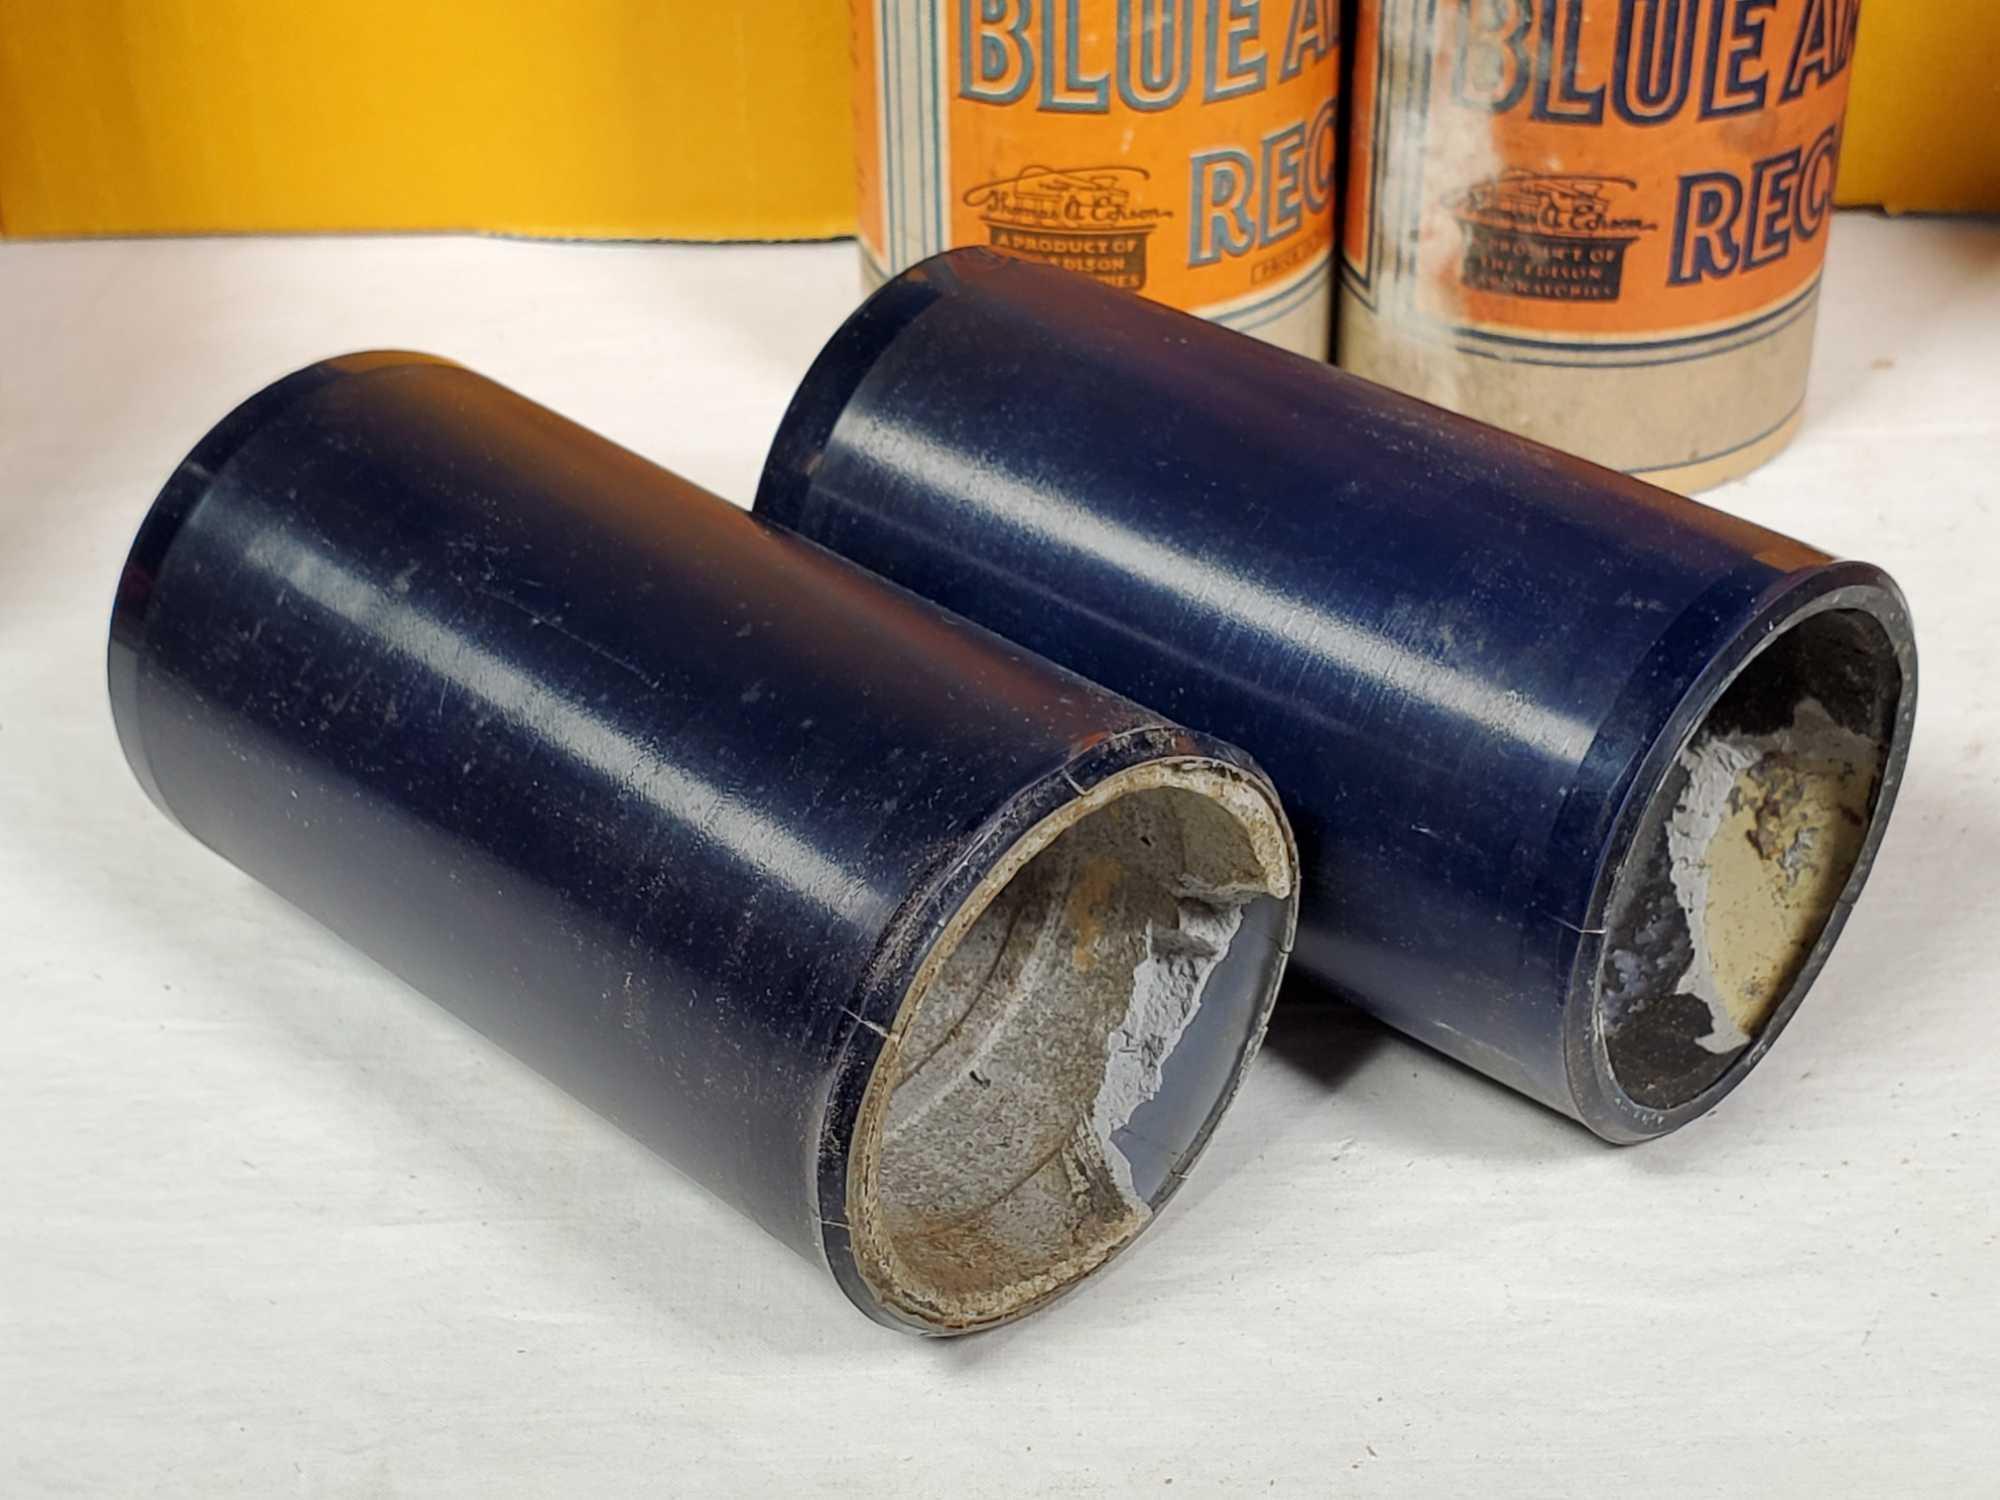 23 Edison Blue Amberol and Gold Moulded Cylinder Records